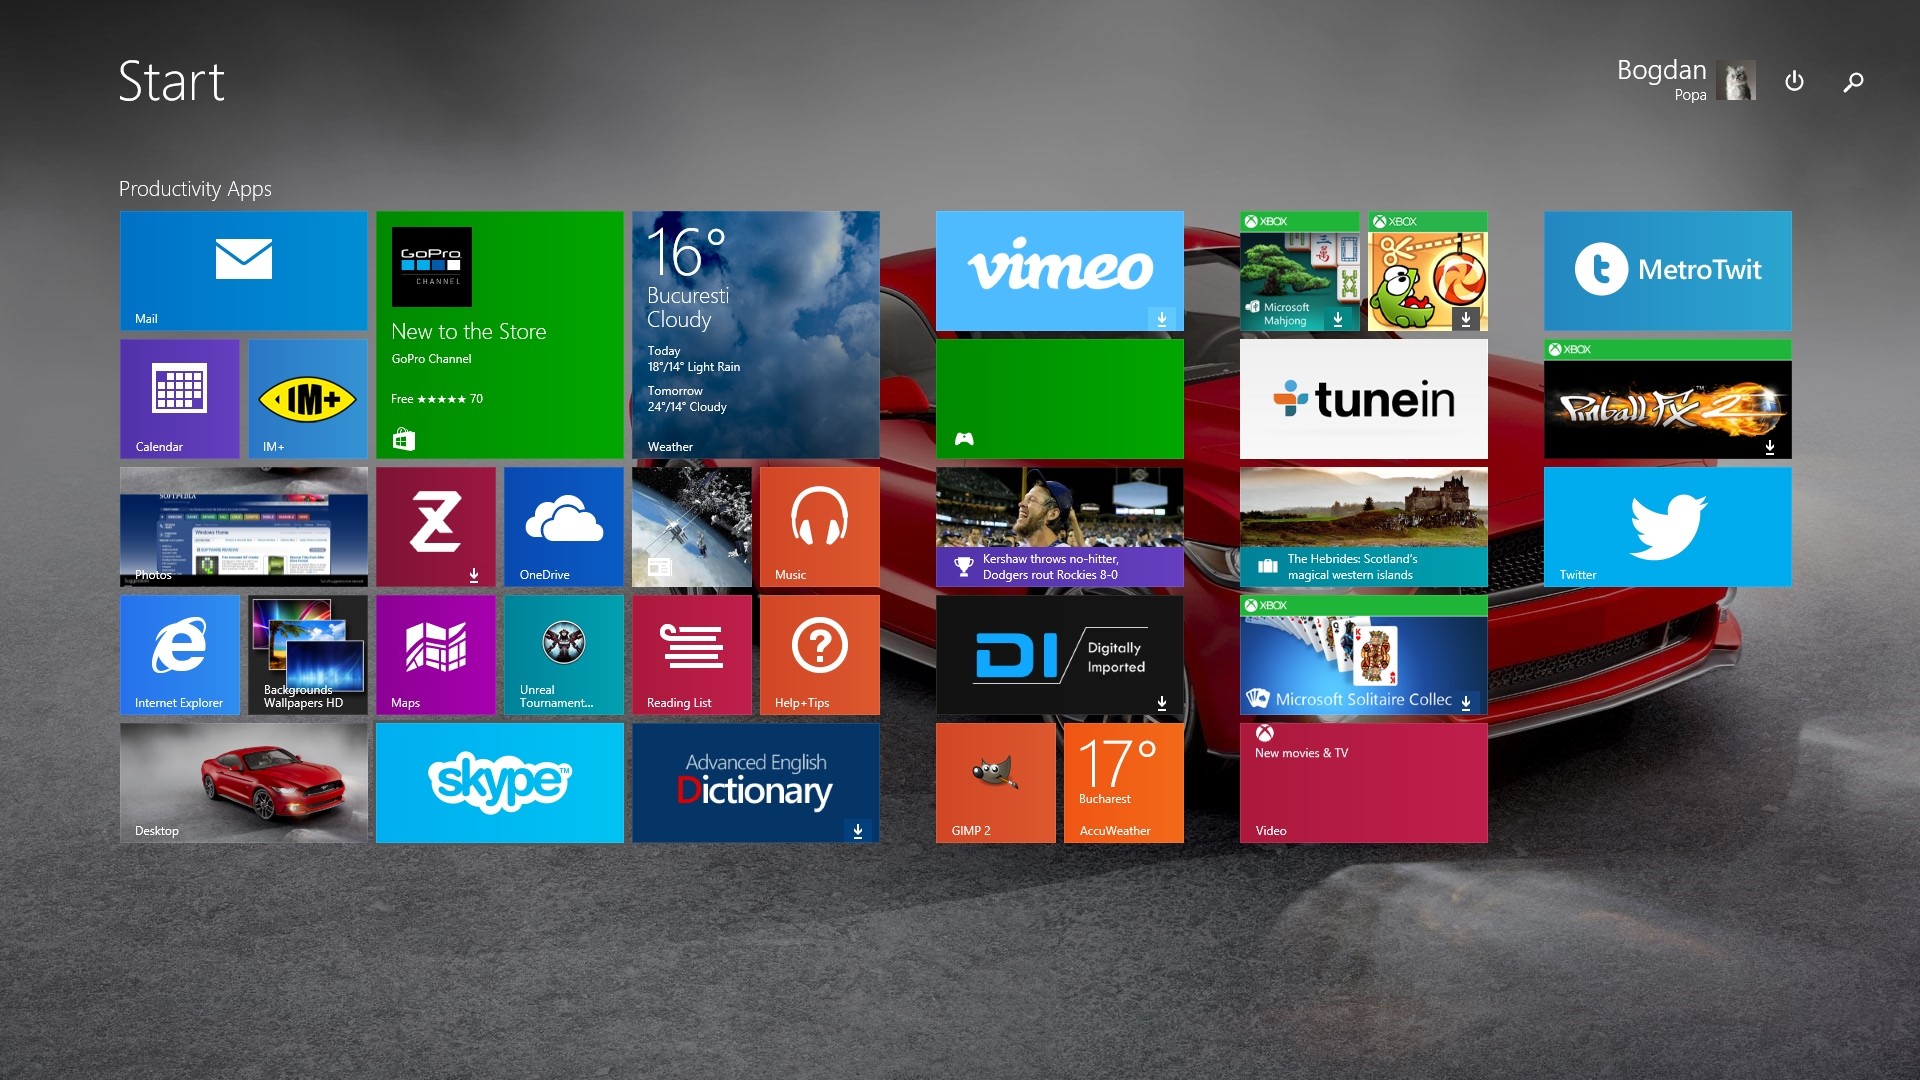 Windows 8.1 Update 2 to Have 3GB in Size, No Start Menu Included – Rumor